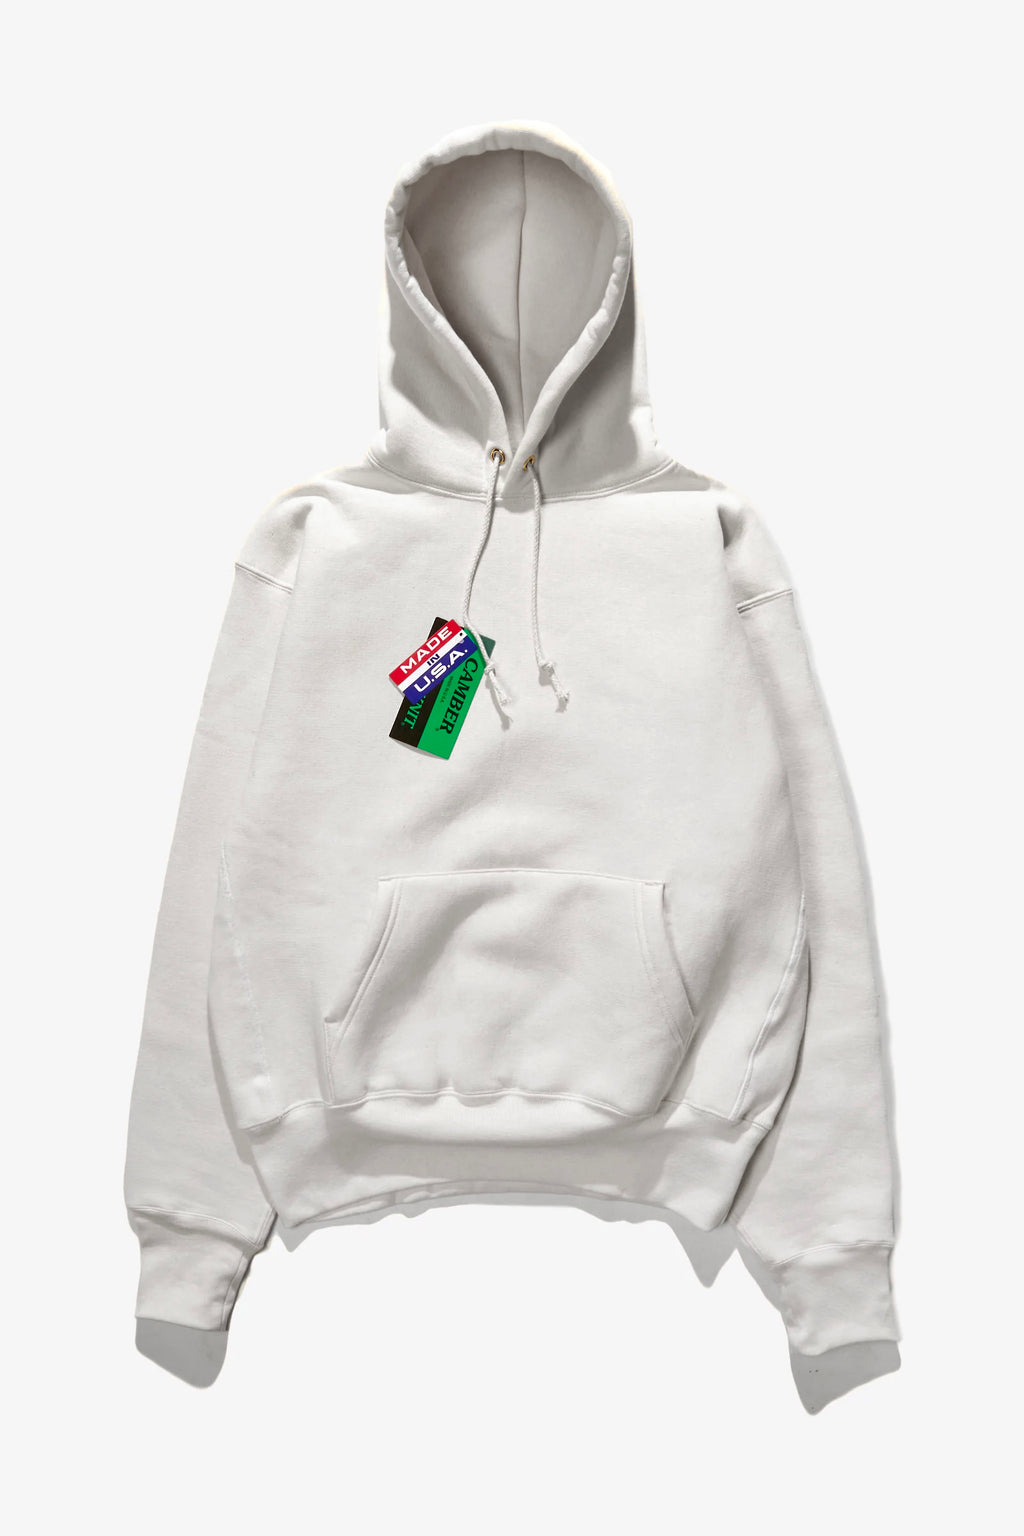 Camber USA - 232 12oz Pullover Hoodie - White